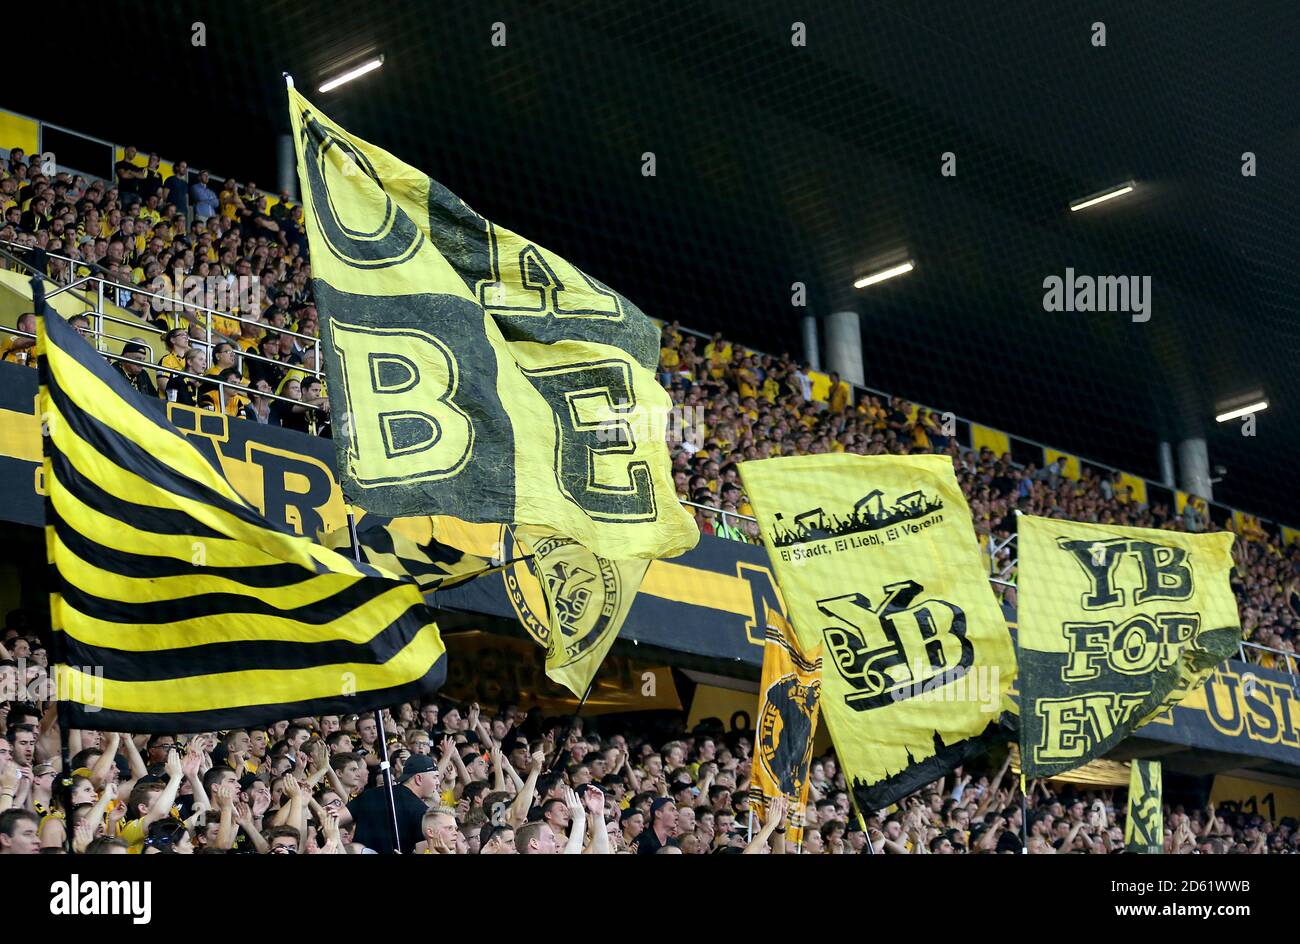 BSC Young Boys fans show their support in the stands during the game Stock Photo